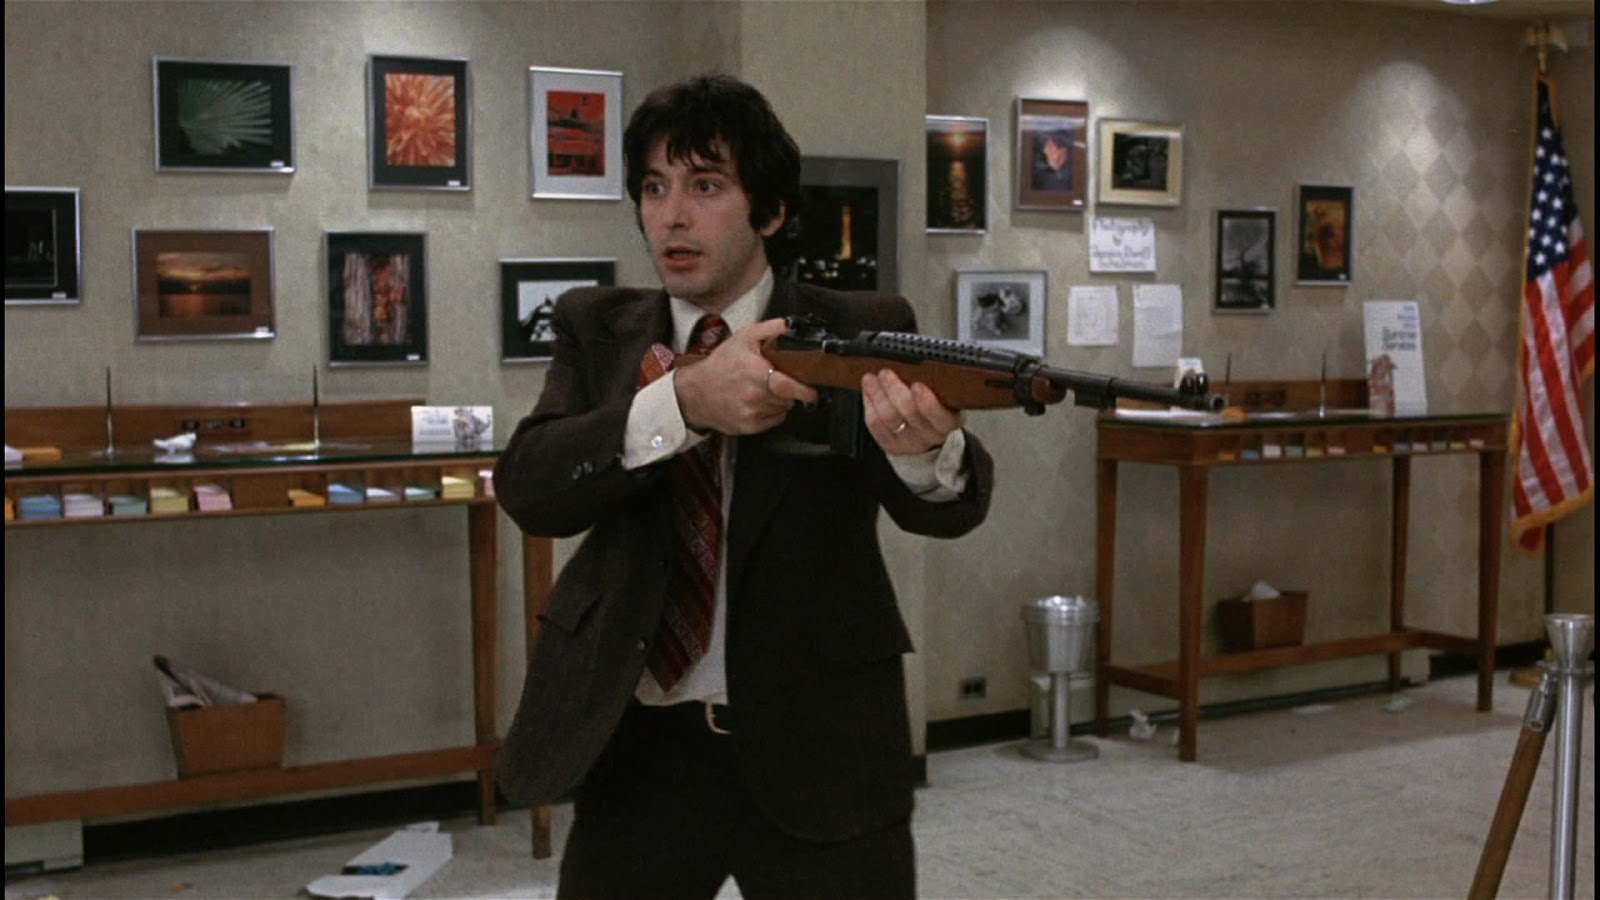 DOG DAY AFTERNOON 40th Anniversary Blu-ray Debuts 9/21! | Forces of Geek